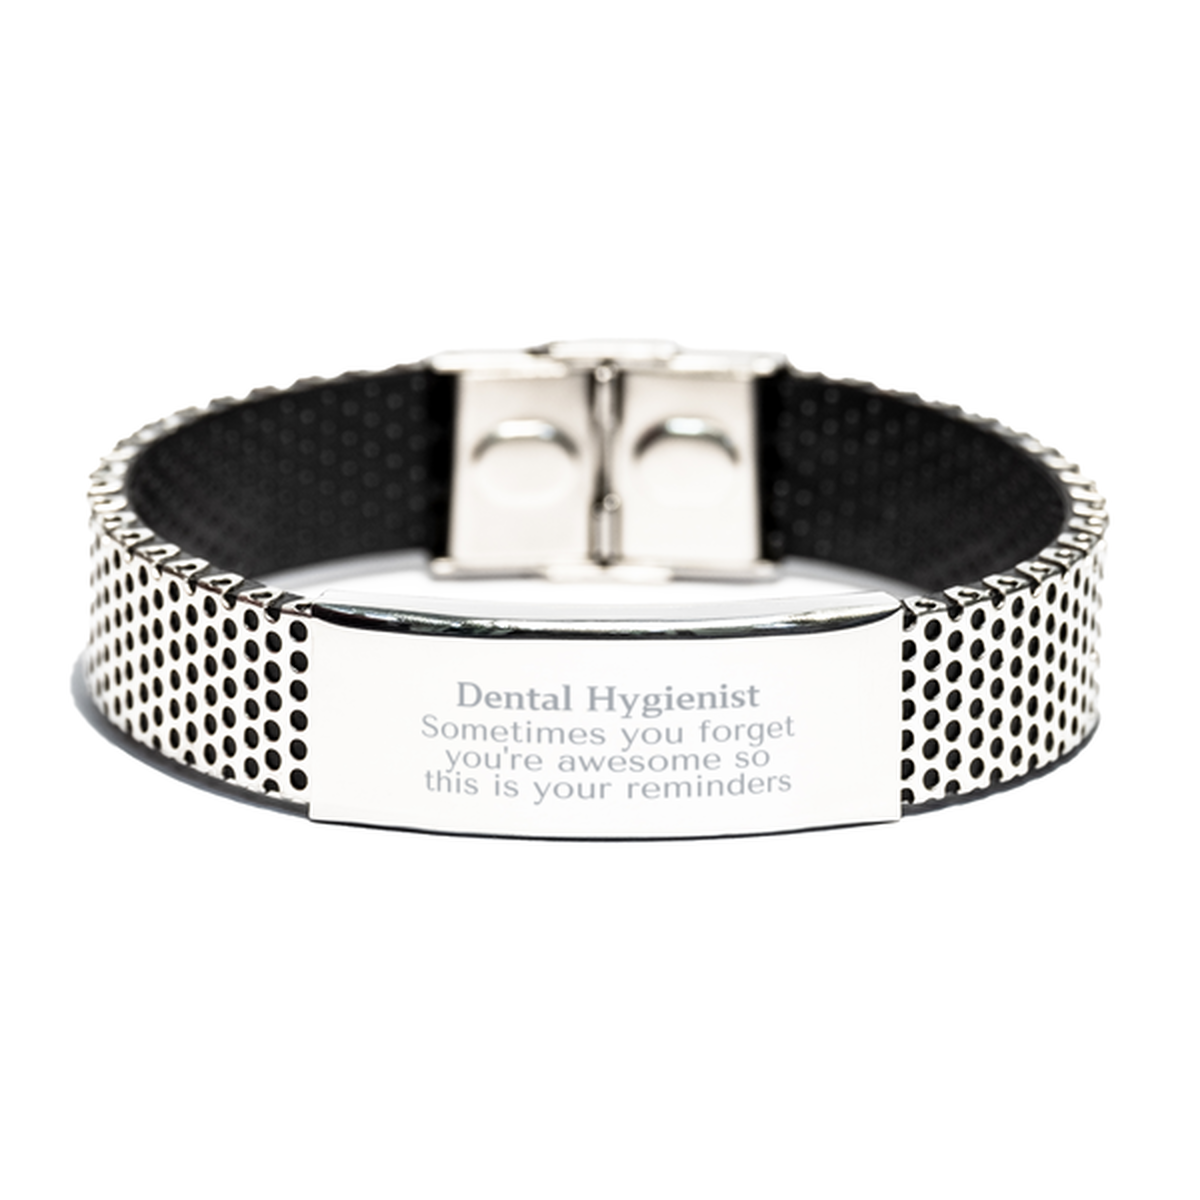 Sentimental Dental Hygienist Stainless Steel Bracelet, Dental Hygienist Sometimes you forget you're awesome so this is your reminders, Graduation Christmas Birthday Gifts for Dental Hygienist, Men, Women, Coworkers